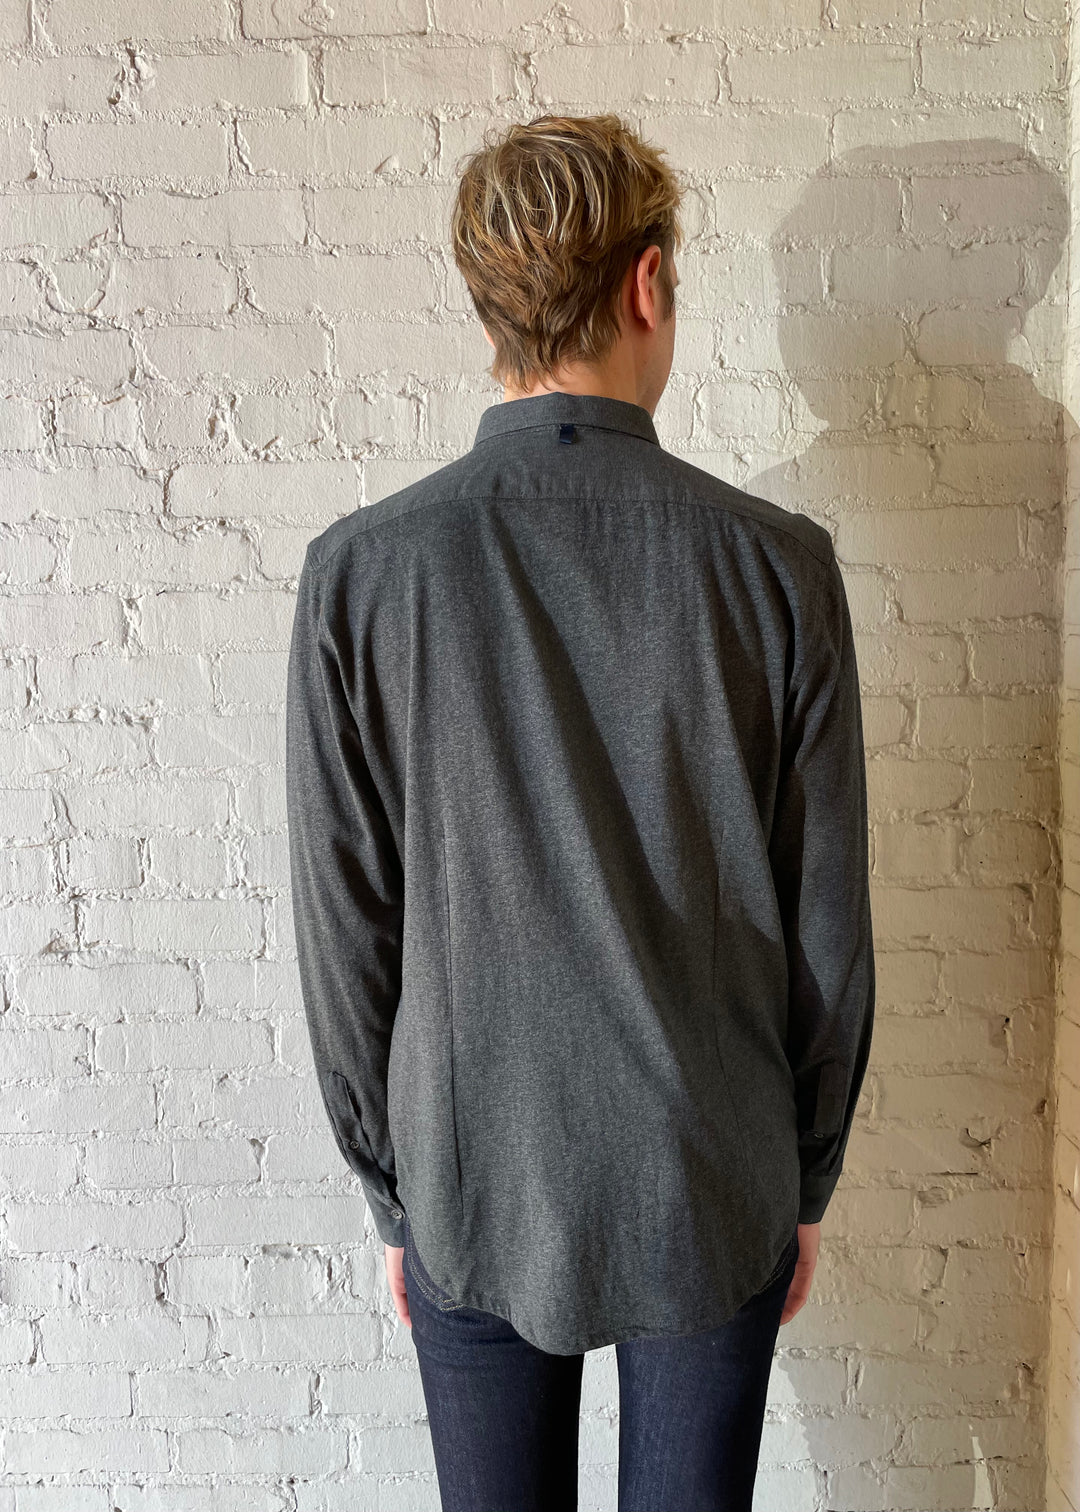 Solid Heather Reworked Shirt - Charcoal